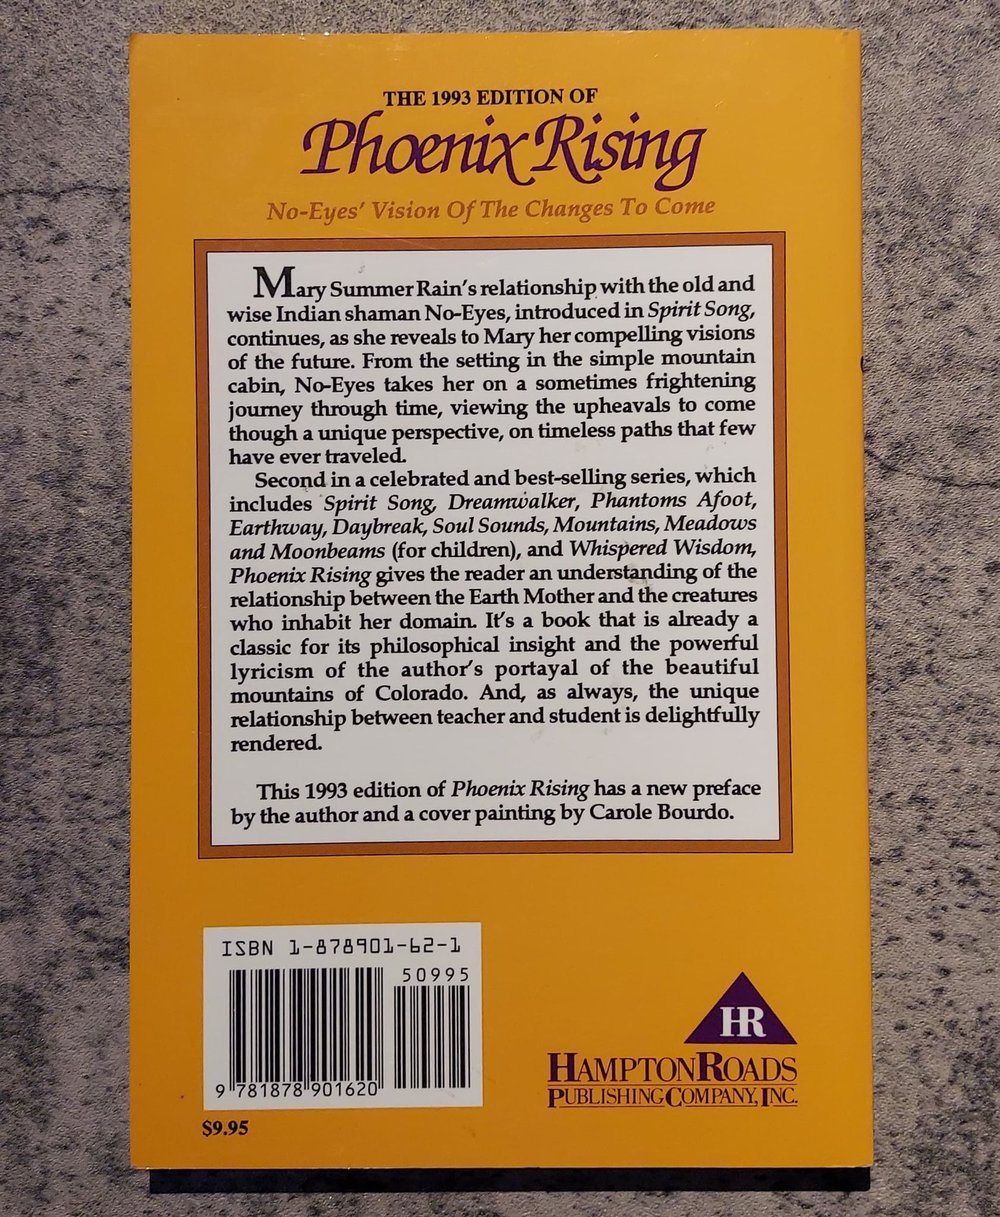 Phoenix Rising: No-Eyes’ Vision of the Changes to Come, by Mary Summer Rain